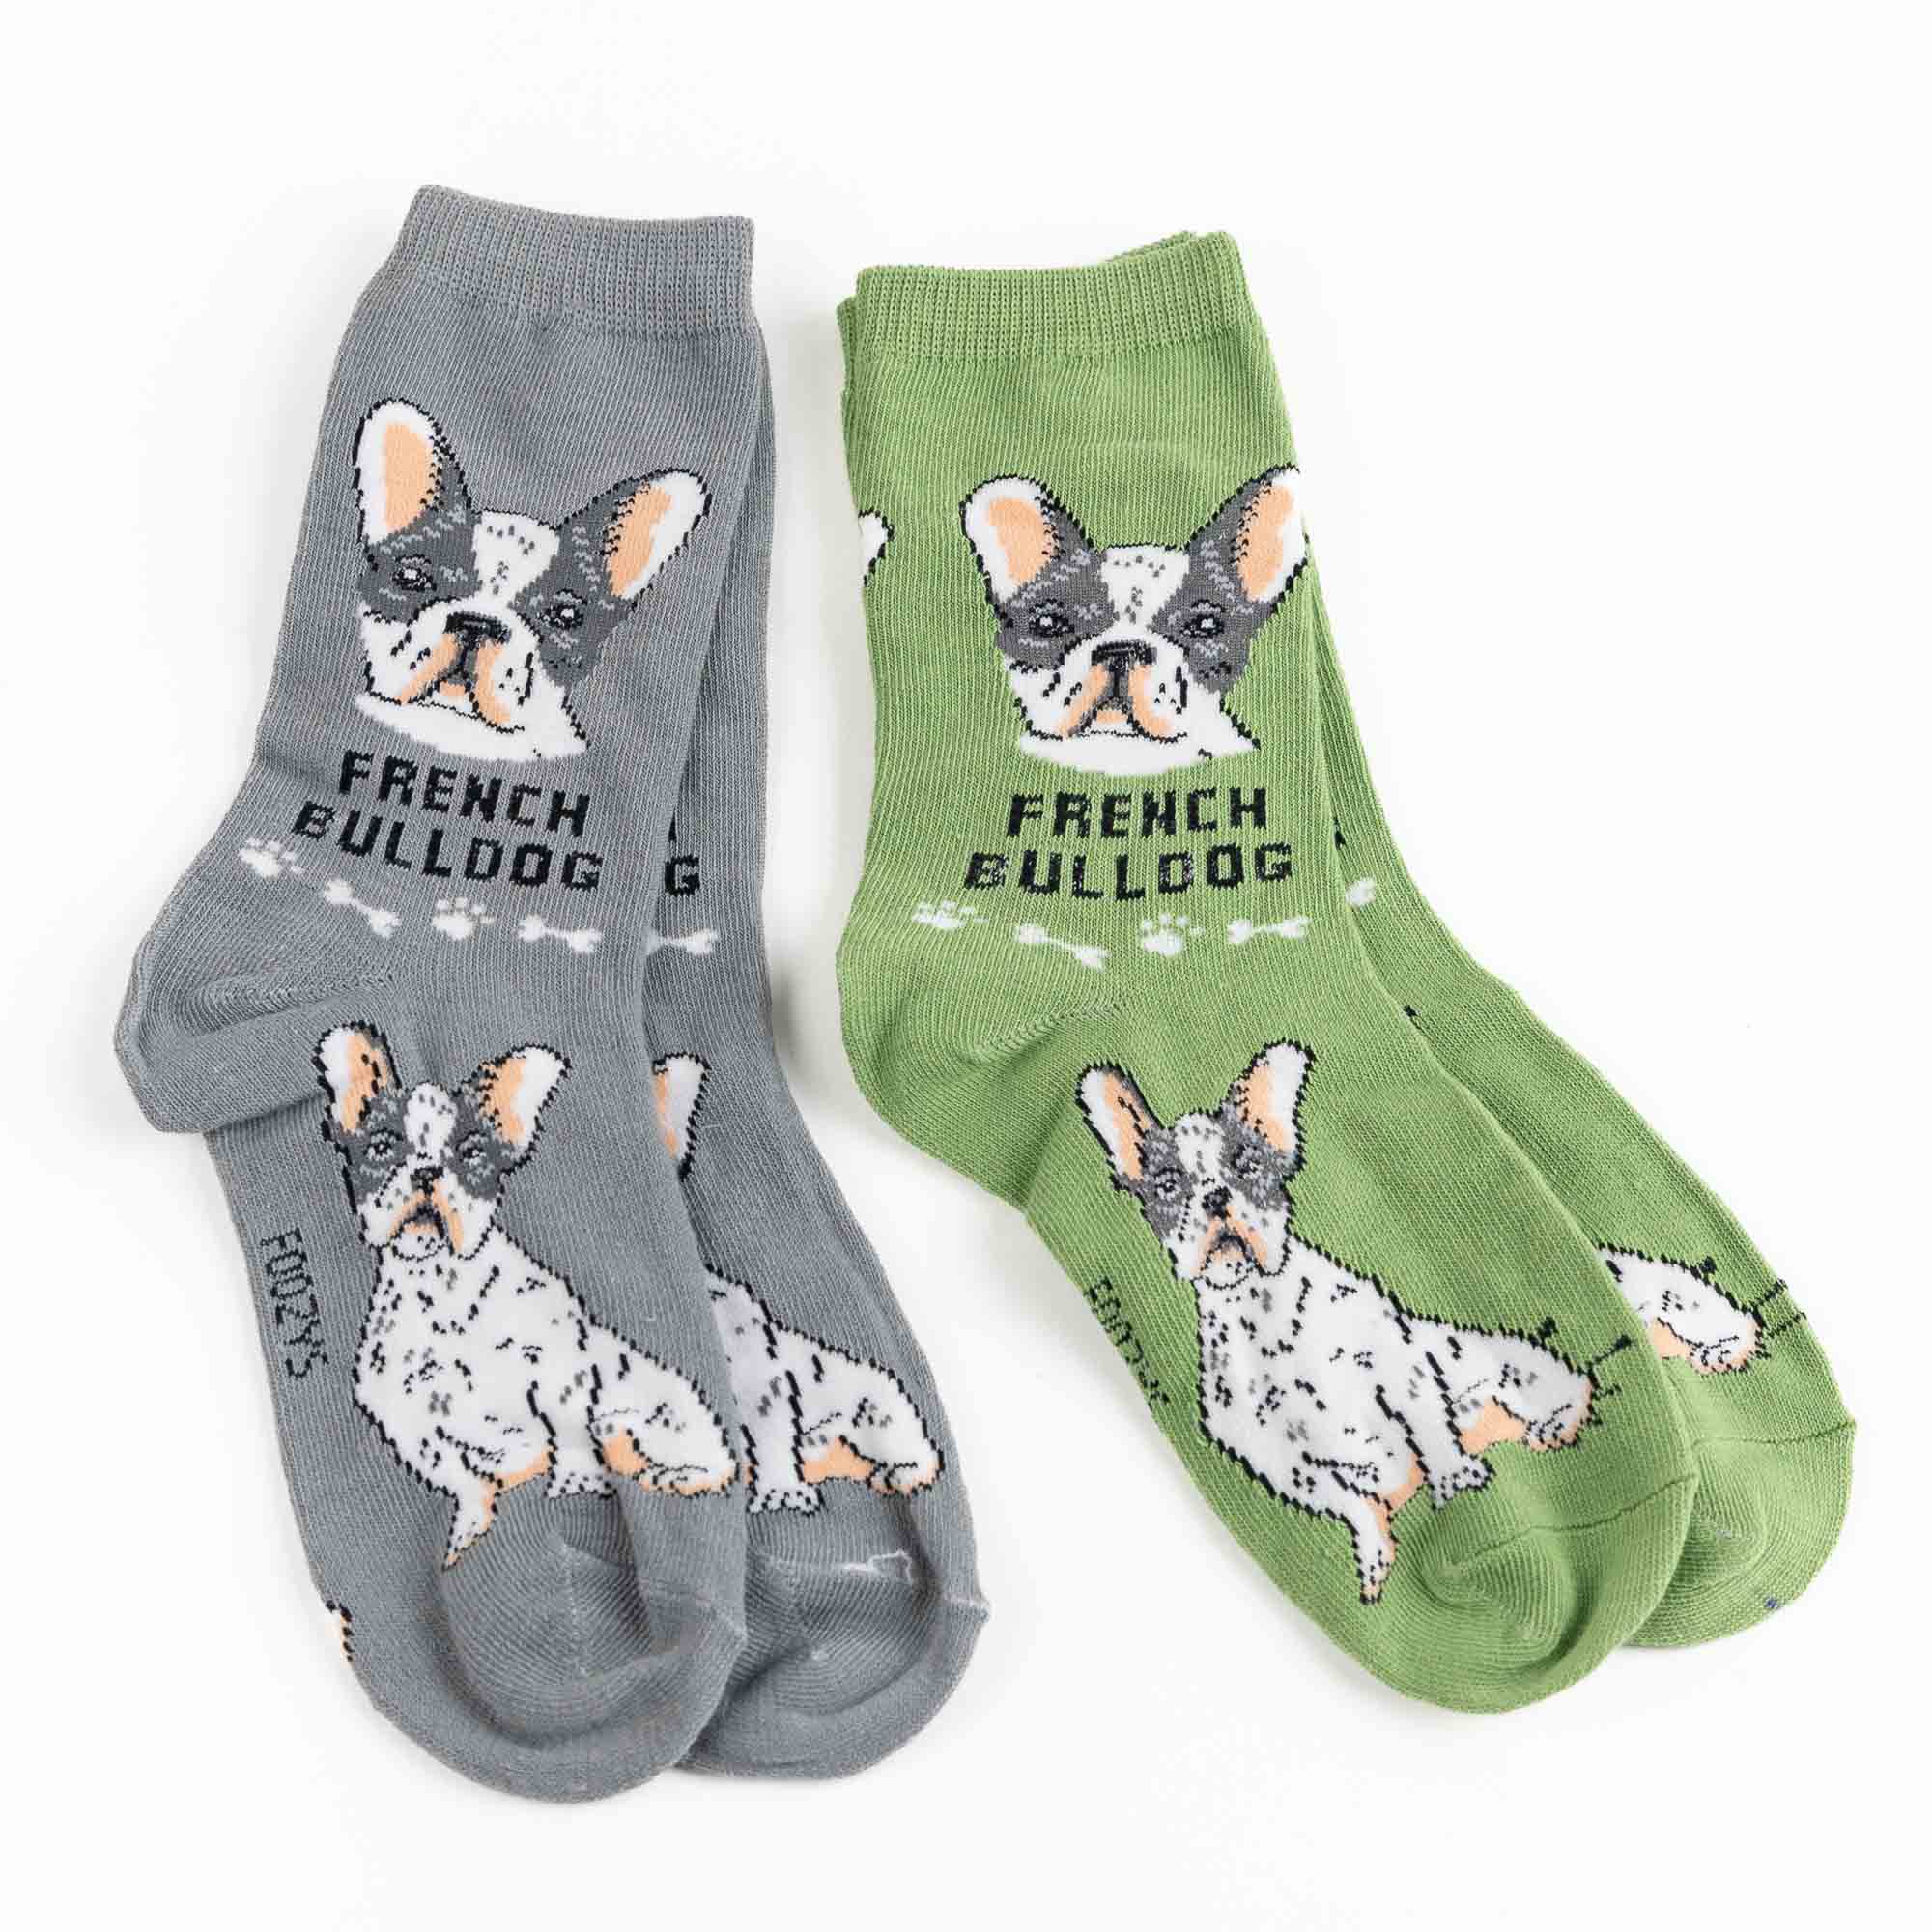 My Favorite Dog Breed Sock ❤️ French Bulldog - 2 Set Collection